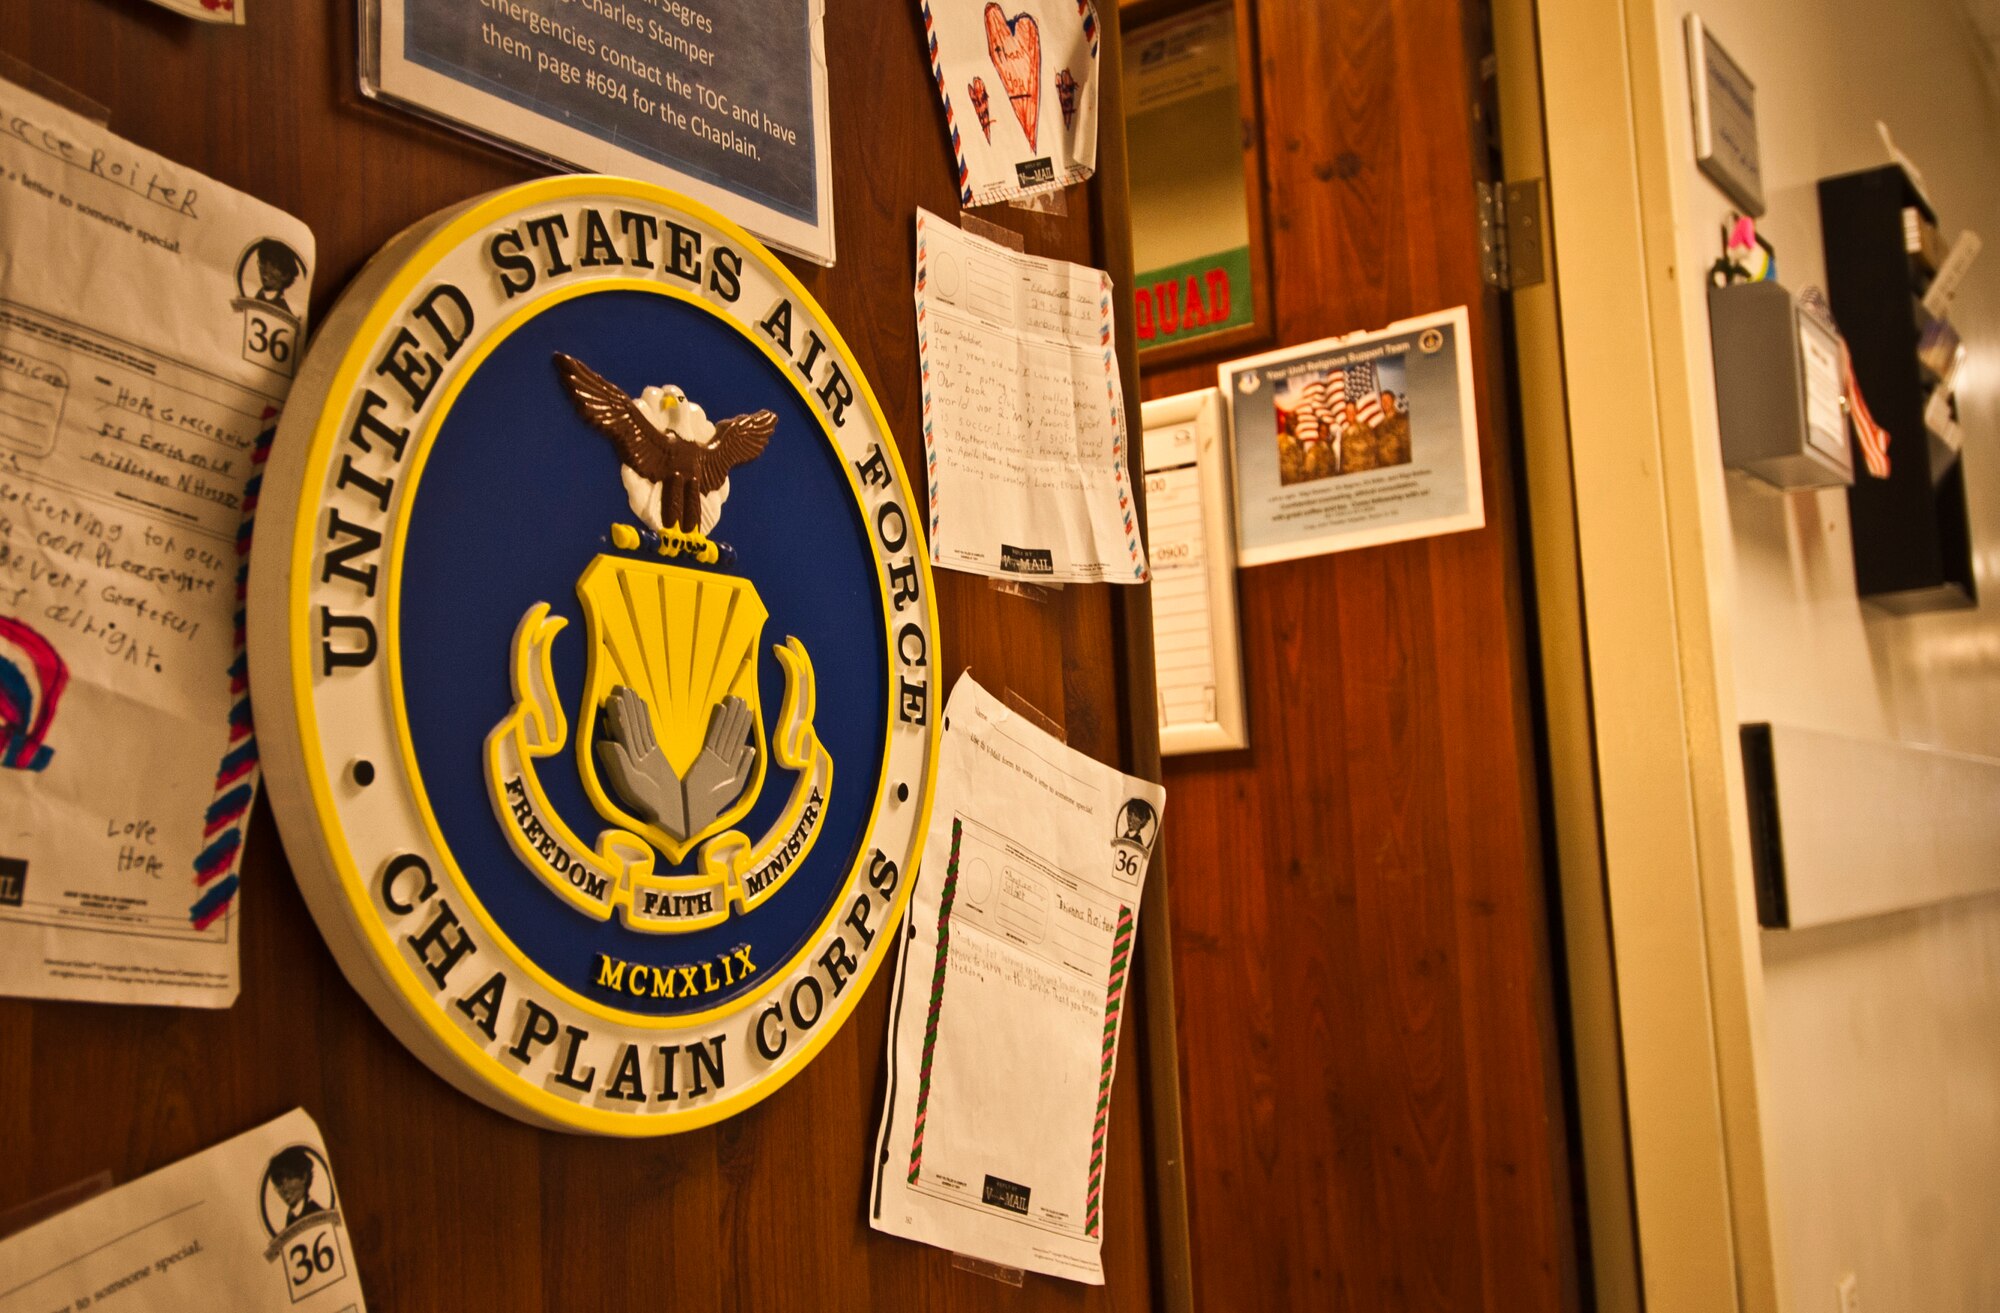 The Craig Joint Theater Hospital Chaplain's office door stands open to welcome visitors seeking spiritual support at Bagram Airfield, Afghanistan, Aug. 4, 2012. Bagram’s Religious Support Teams offer spiritual support to Airmen managing the stress of deployed operations. (U.S. Air Force Photo/Capt. Raymond Geoffroy)